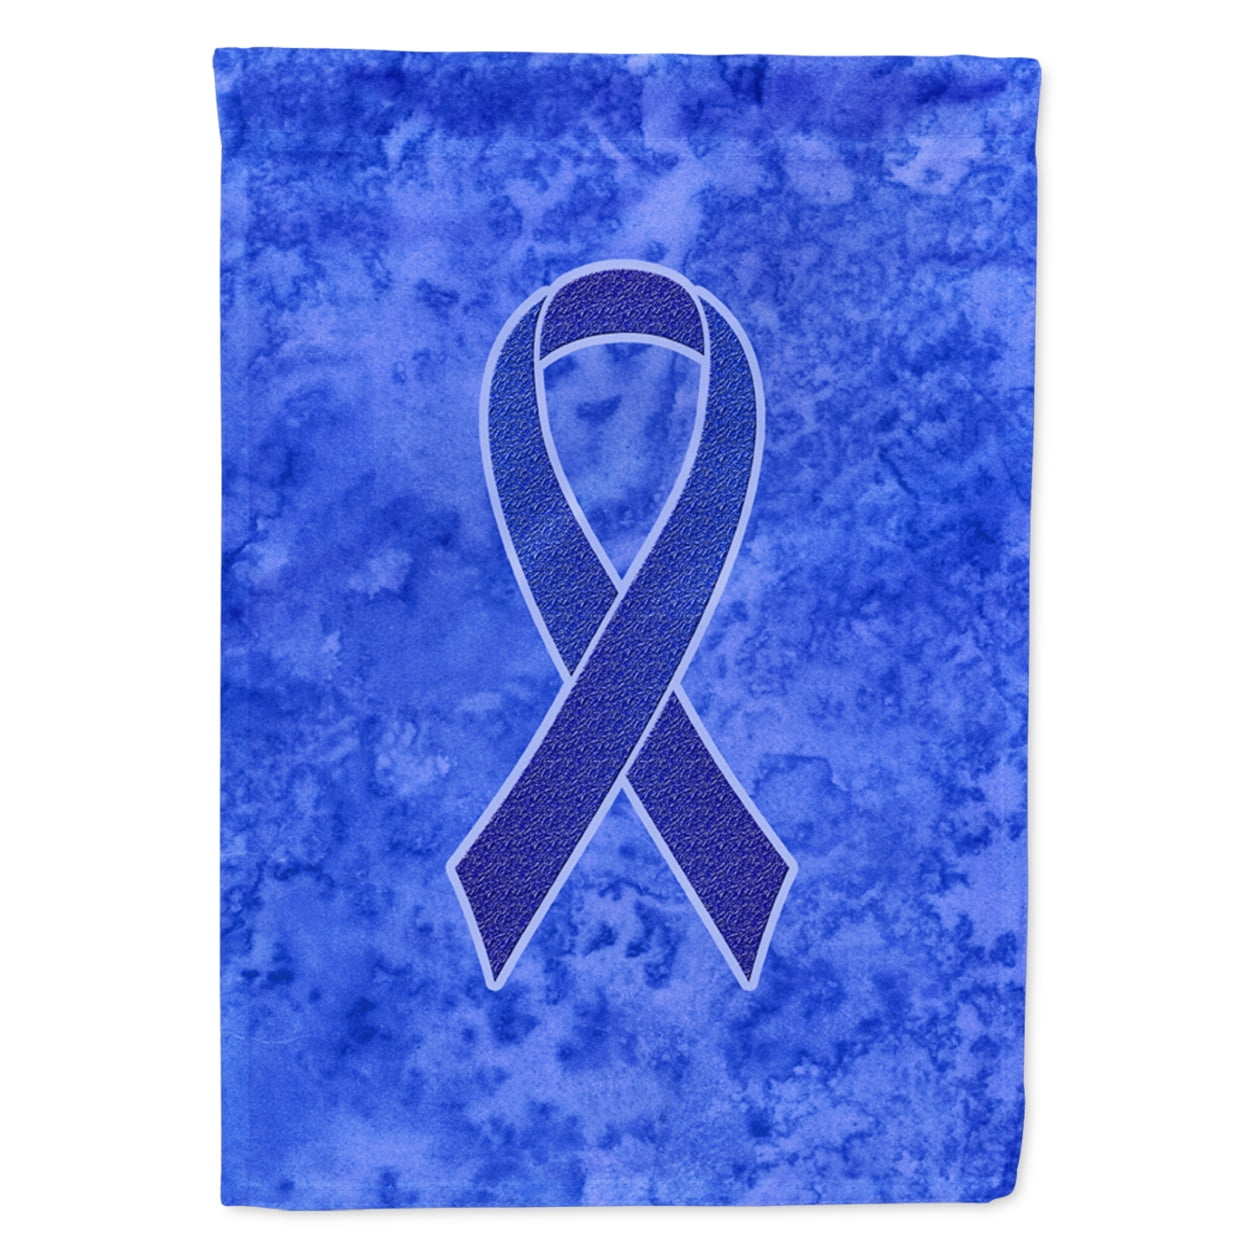 Dark blue ribbon awareness for aids day concept. World cancer day